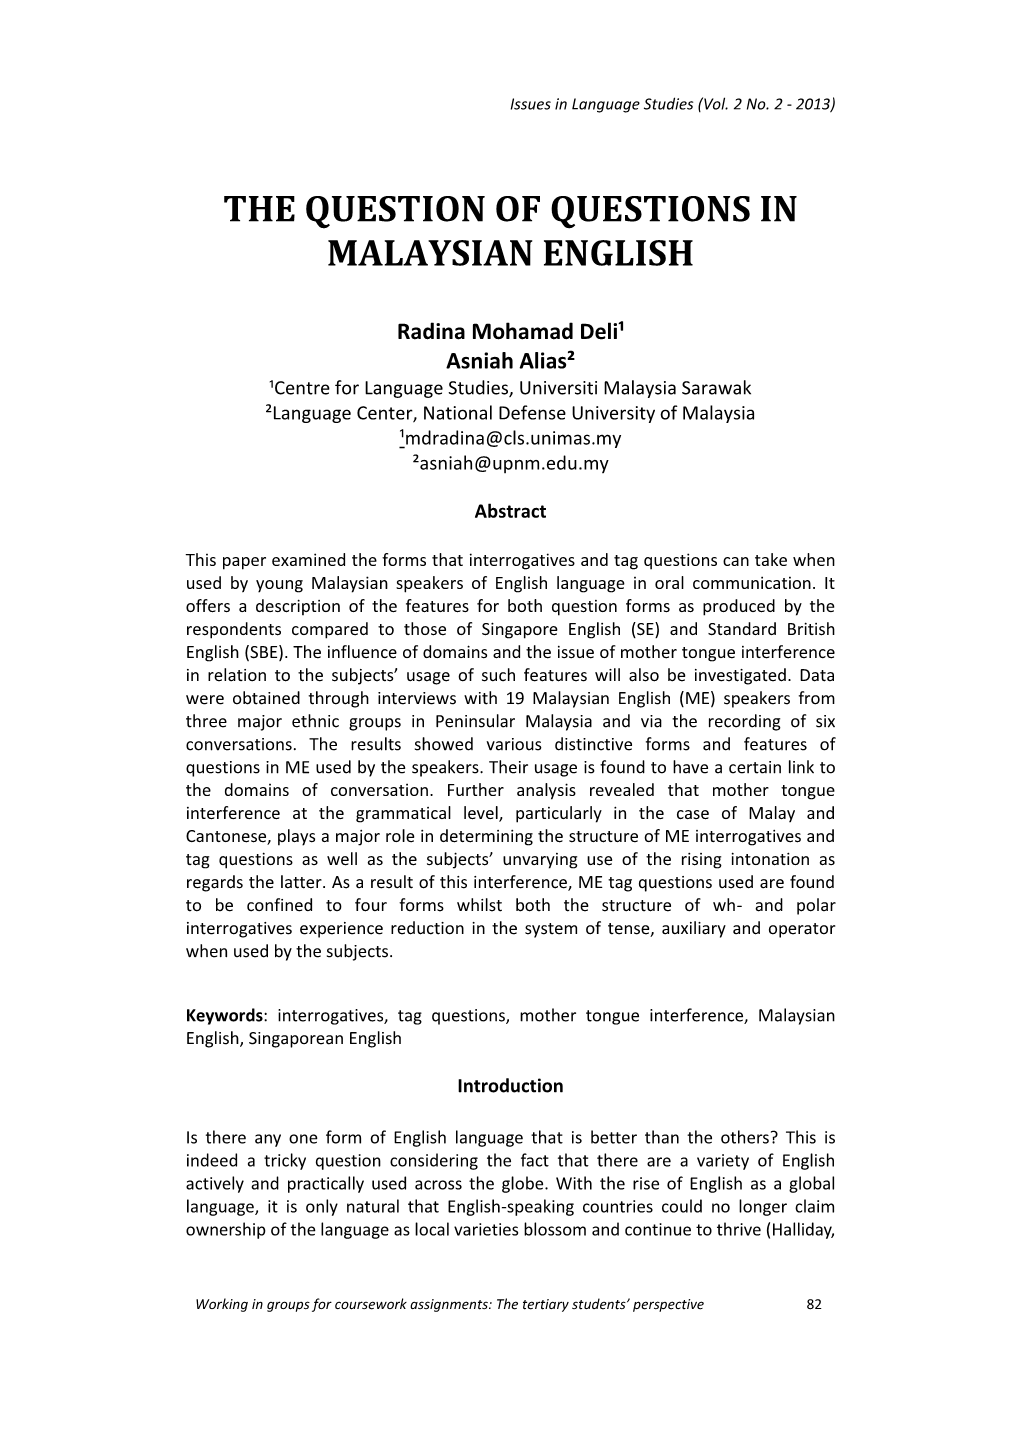 The Question of Questions in Malaysian English